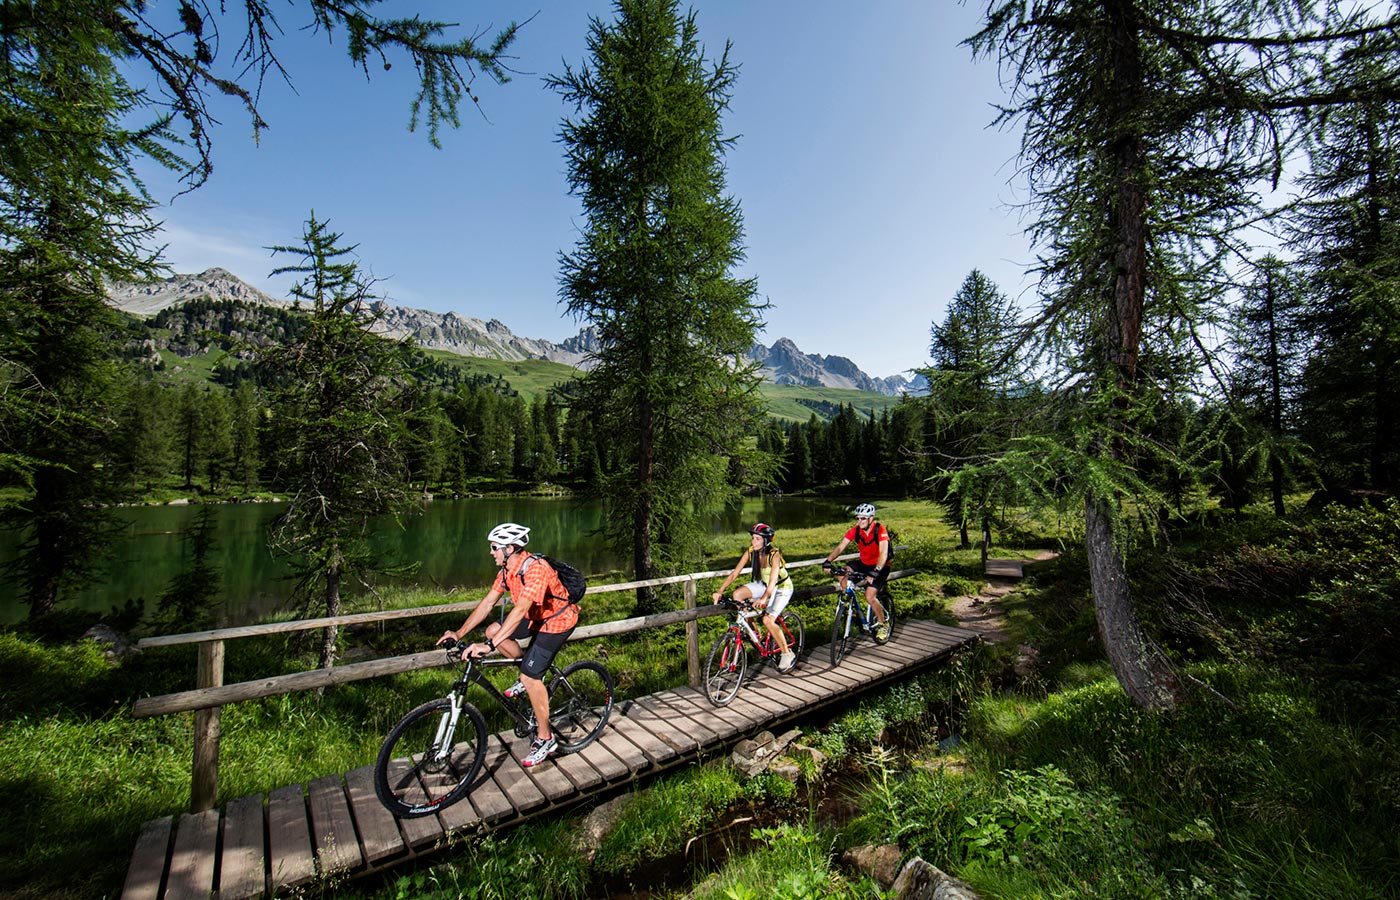 Cycling tourists enjoy a bike ride surrounded by nature